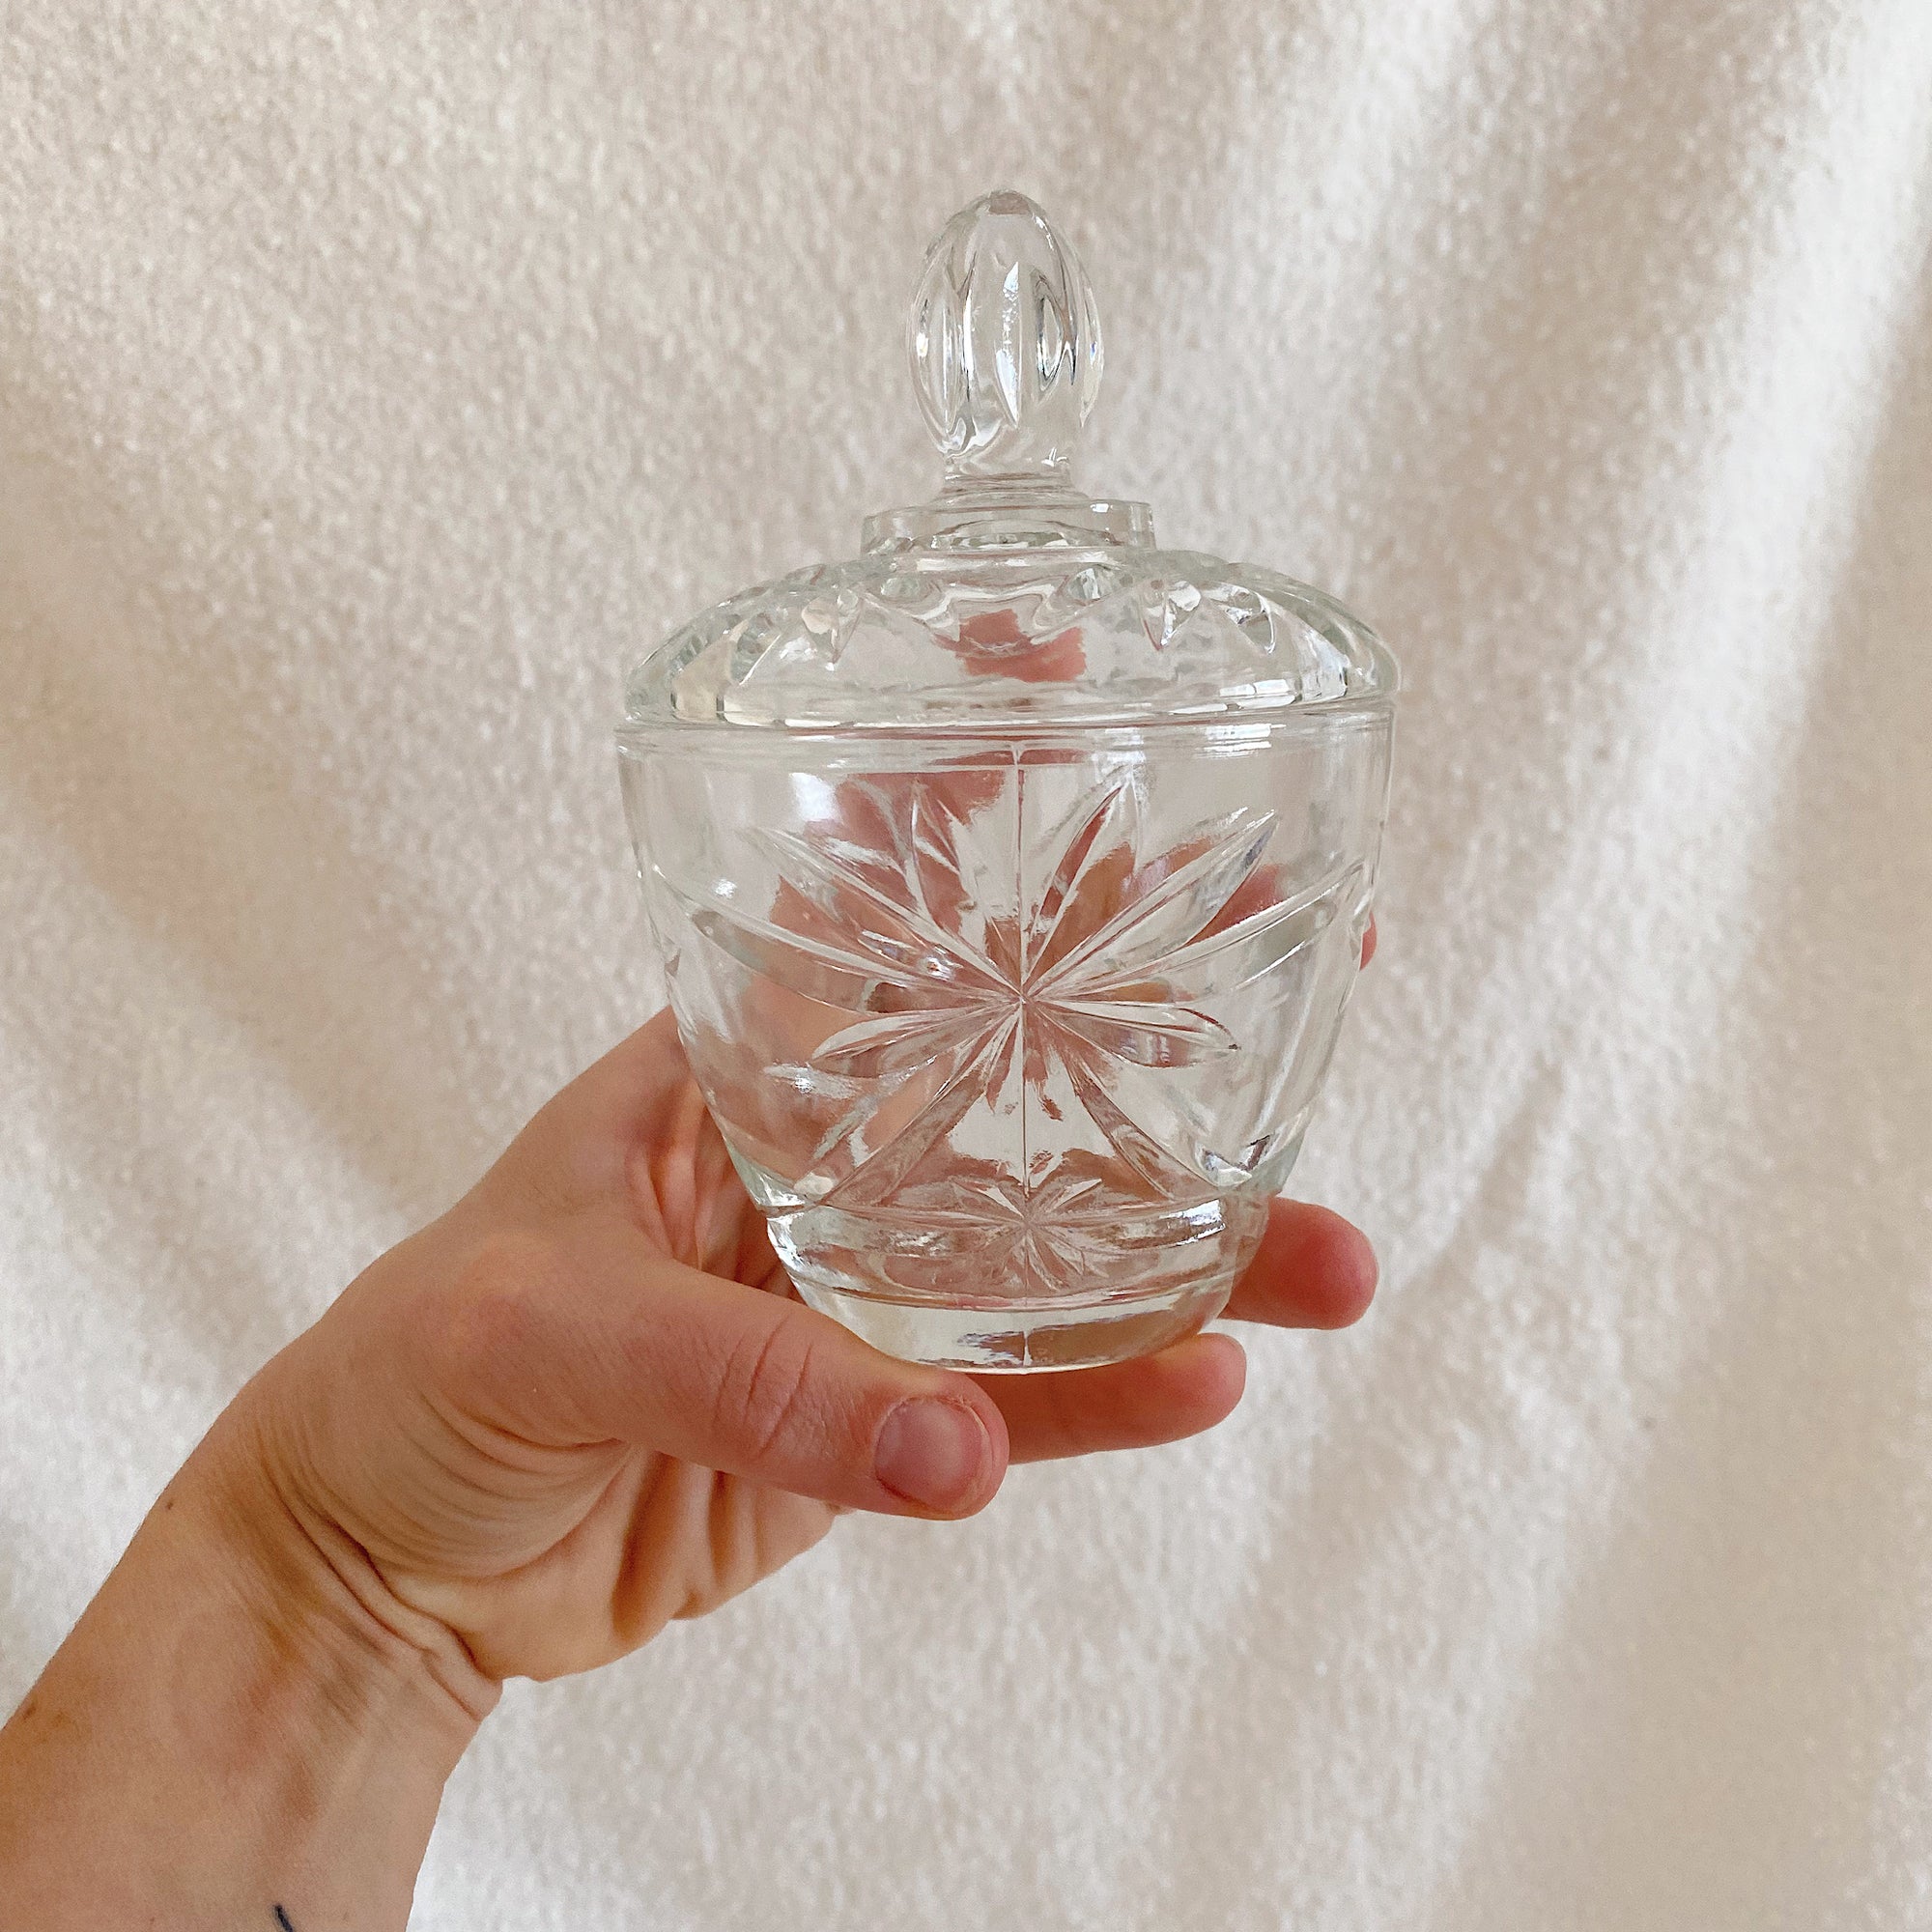 Thrifted Goods - Vintage 1960’s Star Patterned Crystal Dish with Lid